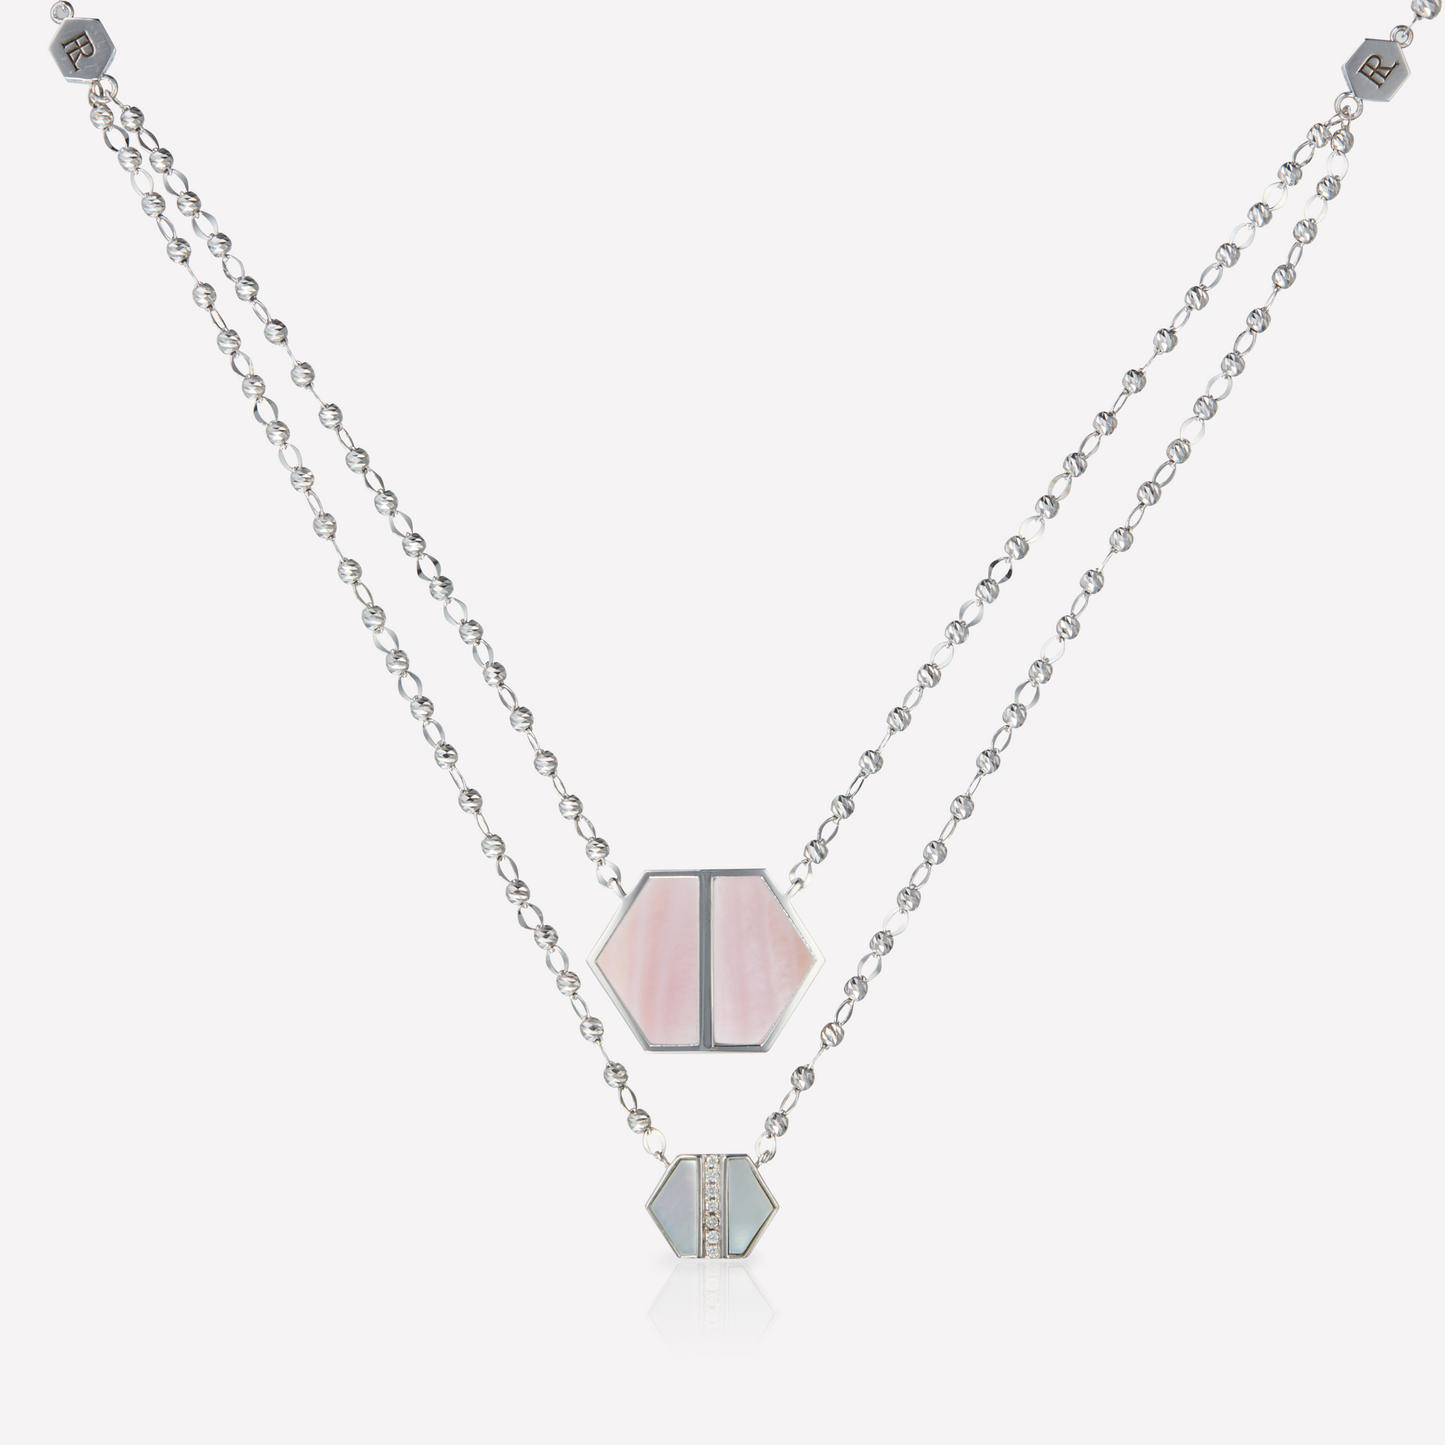 VOID Filled By You Necklace, Large, Pink Nacre, Diamond S